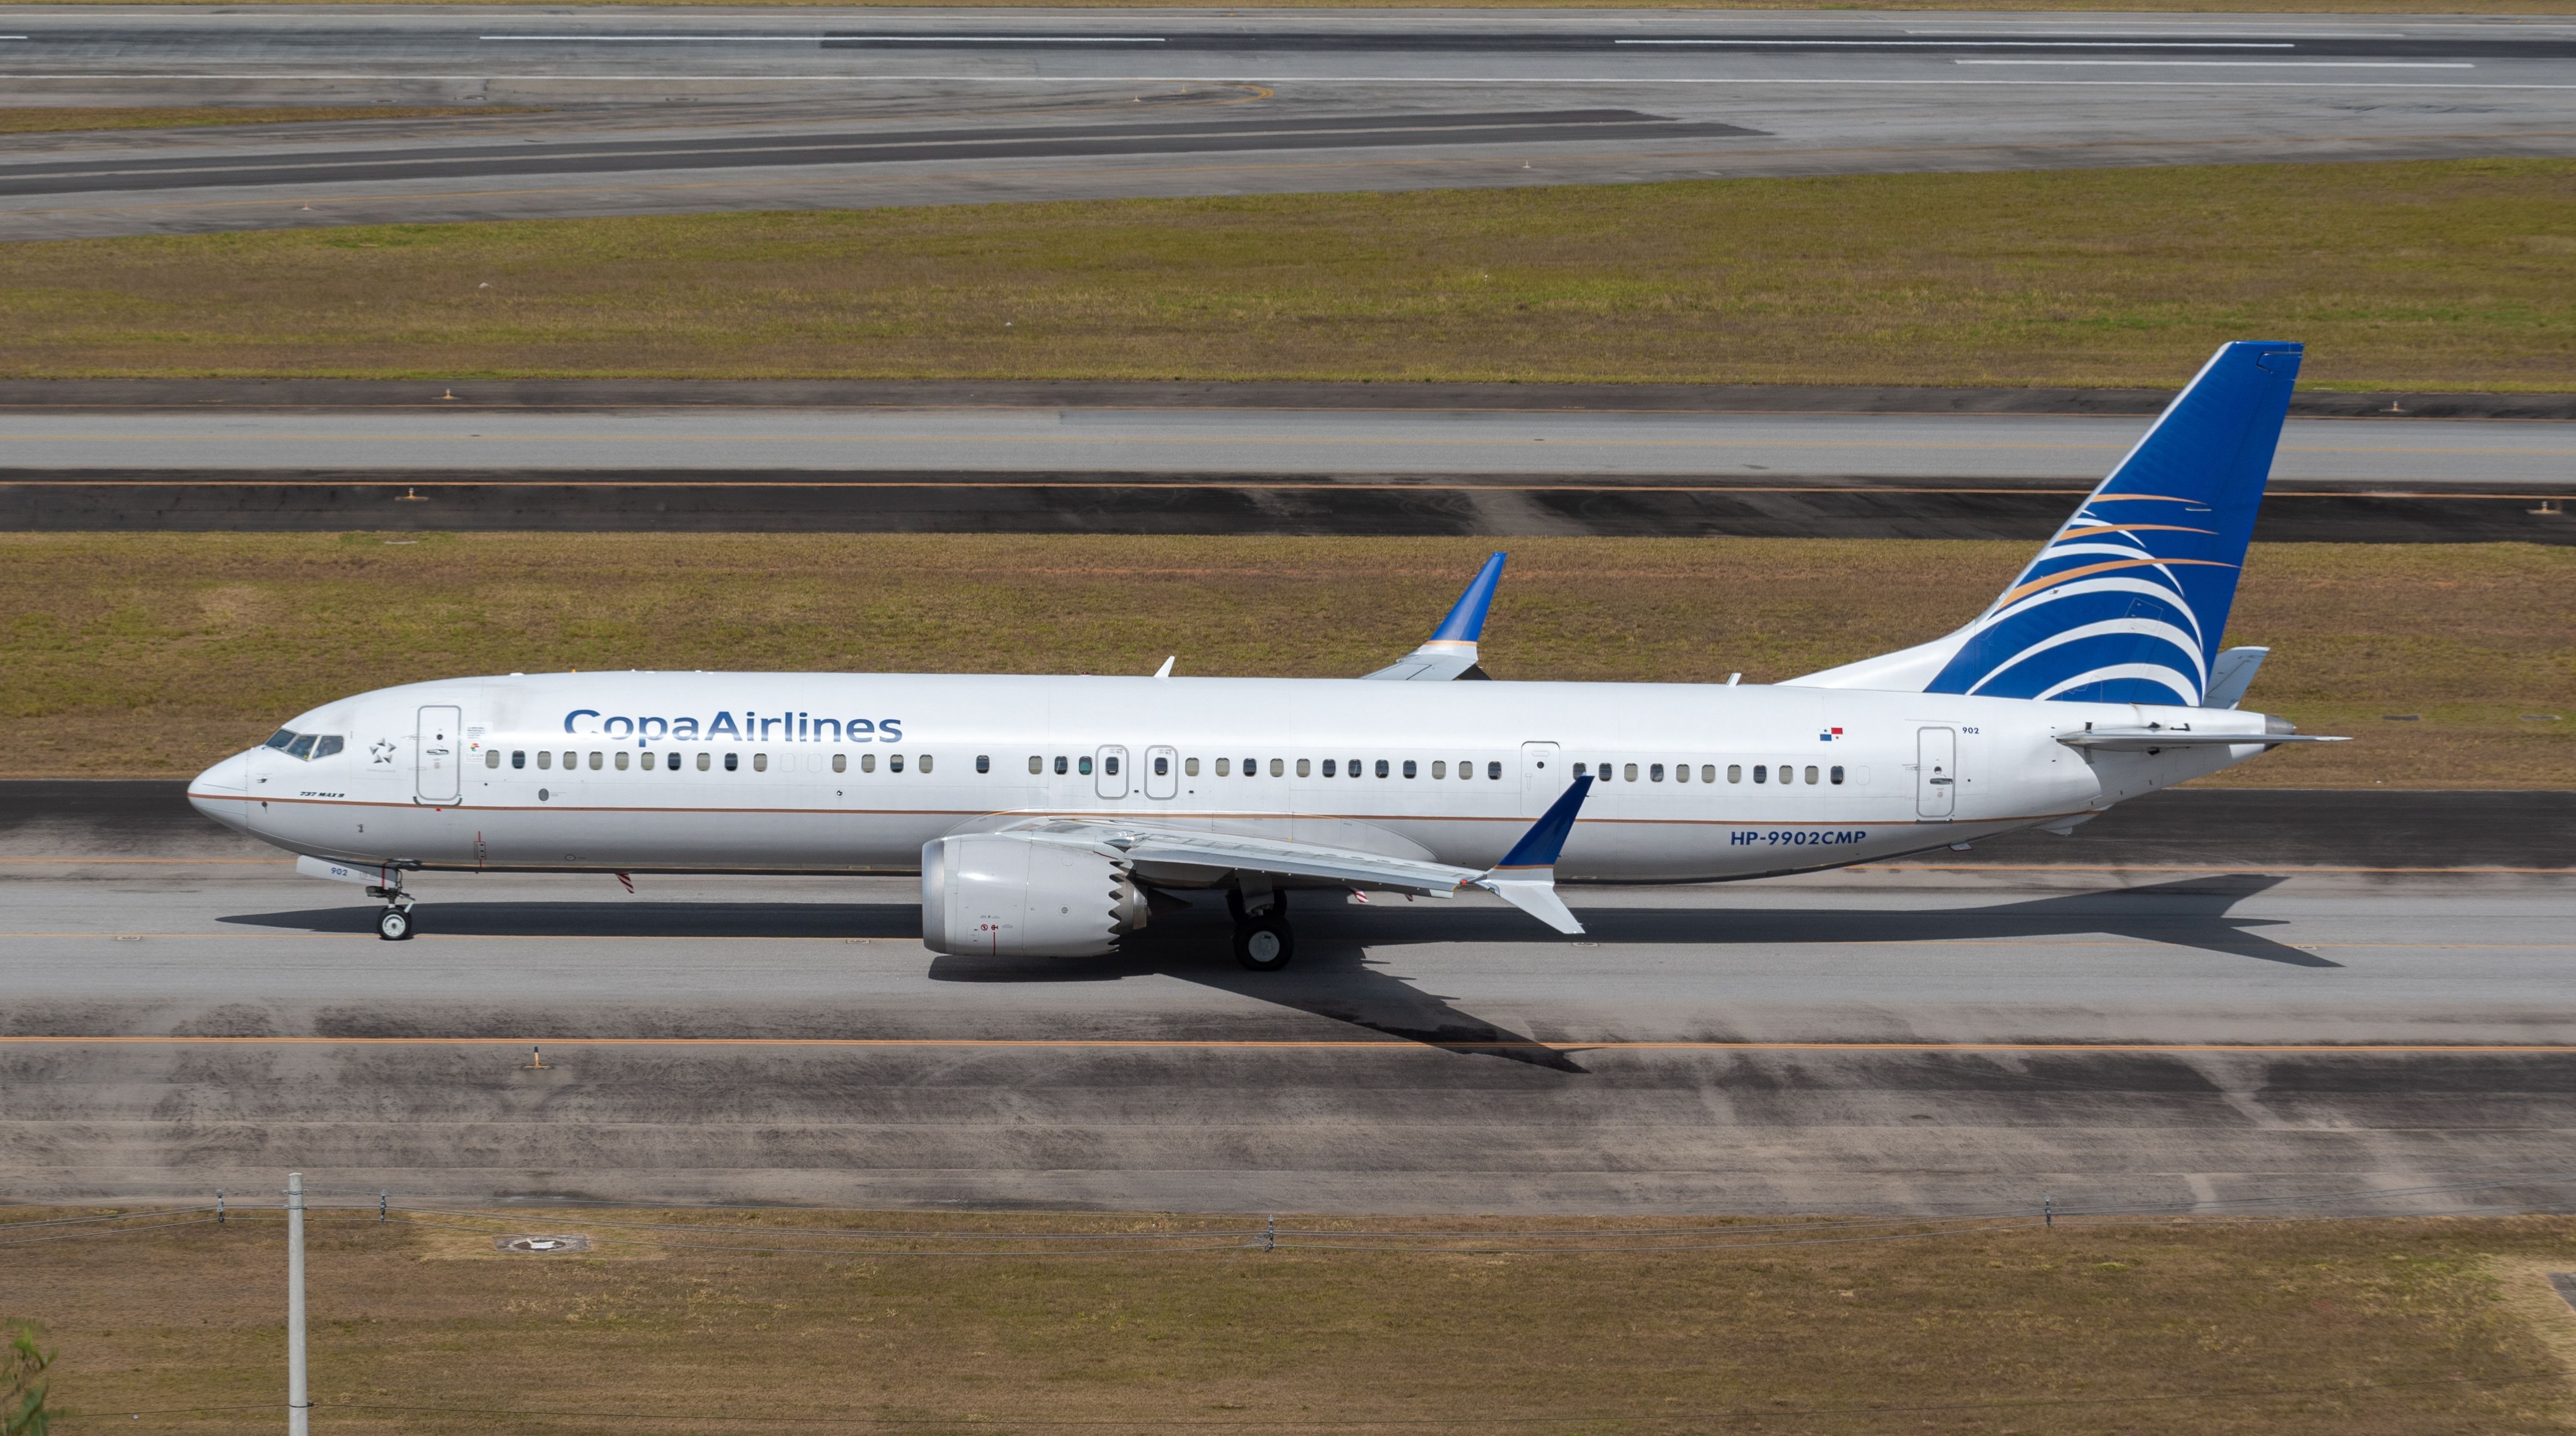 Copa Airlines Boeing 737 MAX 9